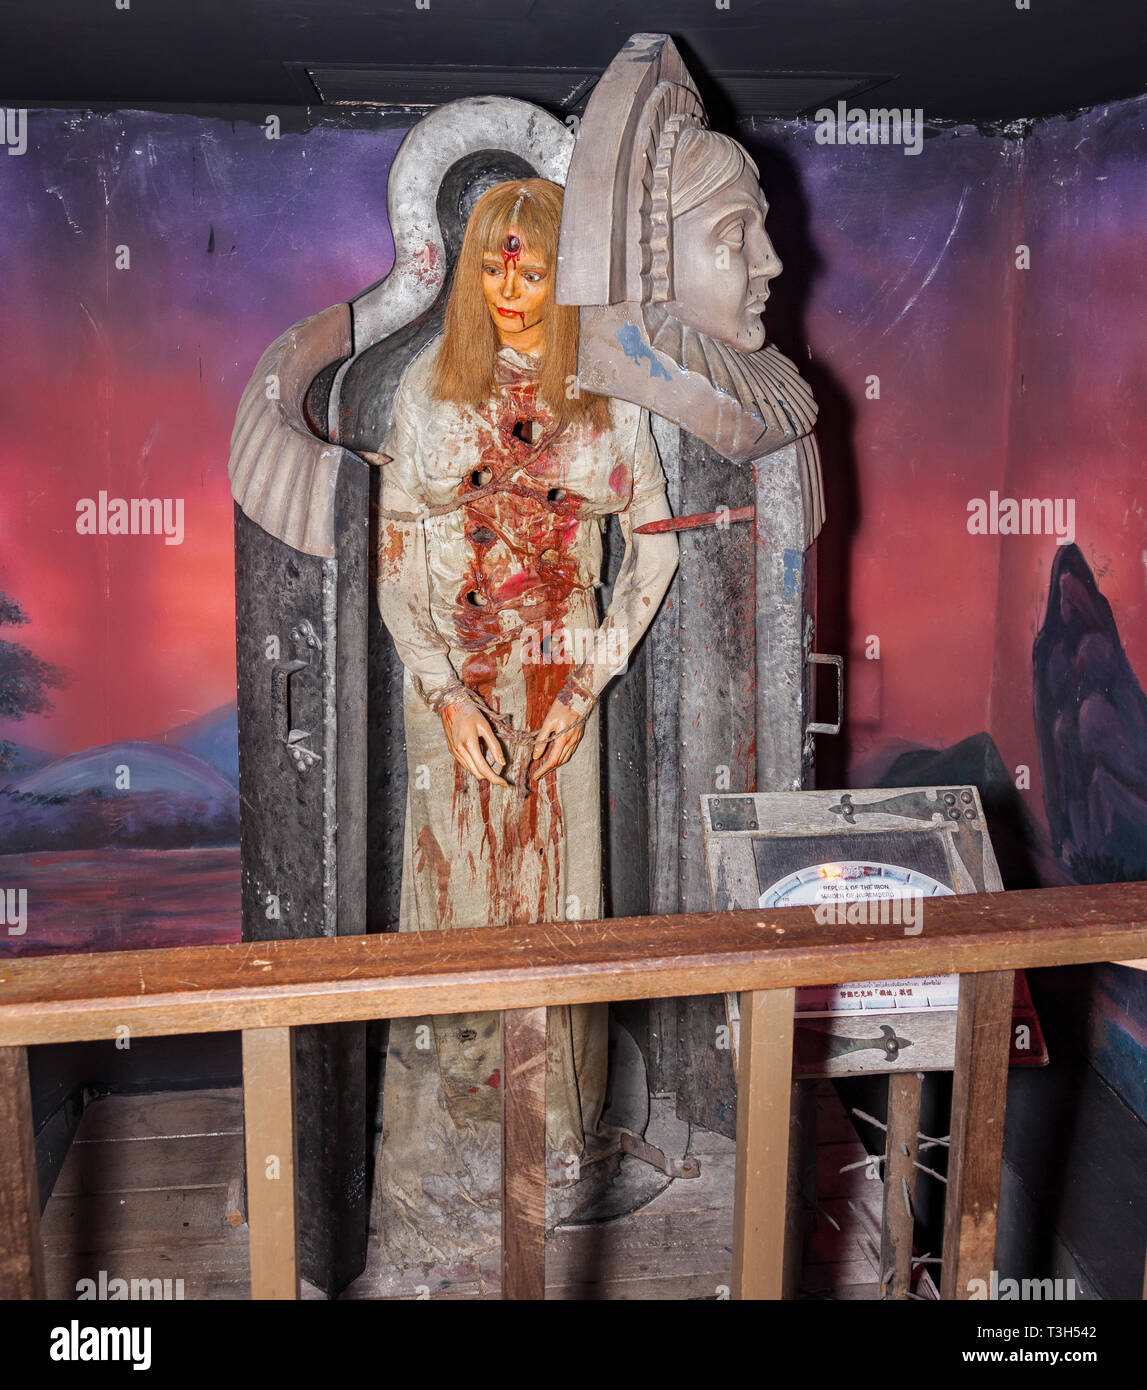 Pattaya, Thailand - November 11, 2015: Reenactment of the 'Iron Maiden' in 'Ripley's Believe It or Not' in Pattaya. The Iron Maiden is a device used t Stock Photo